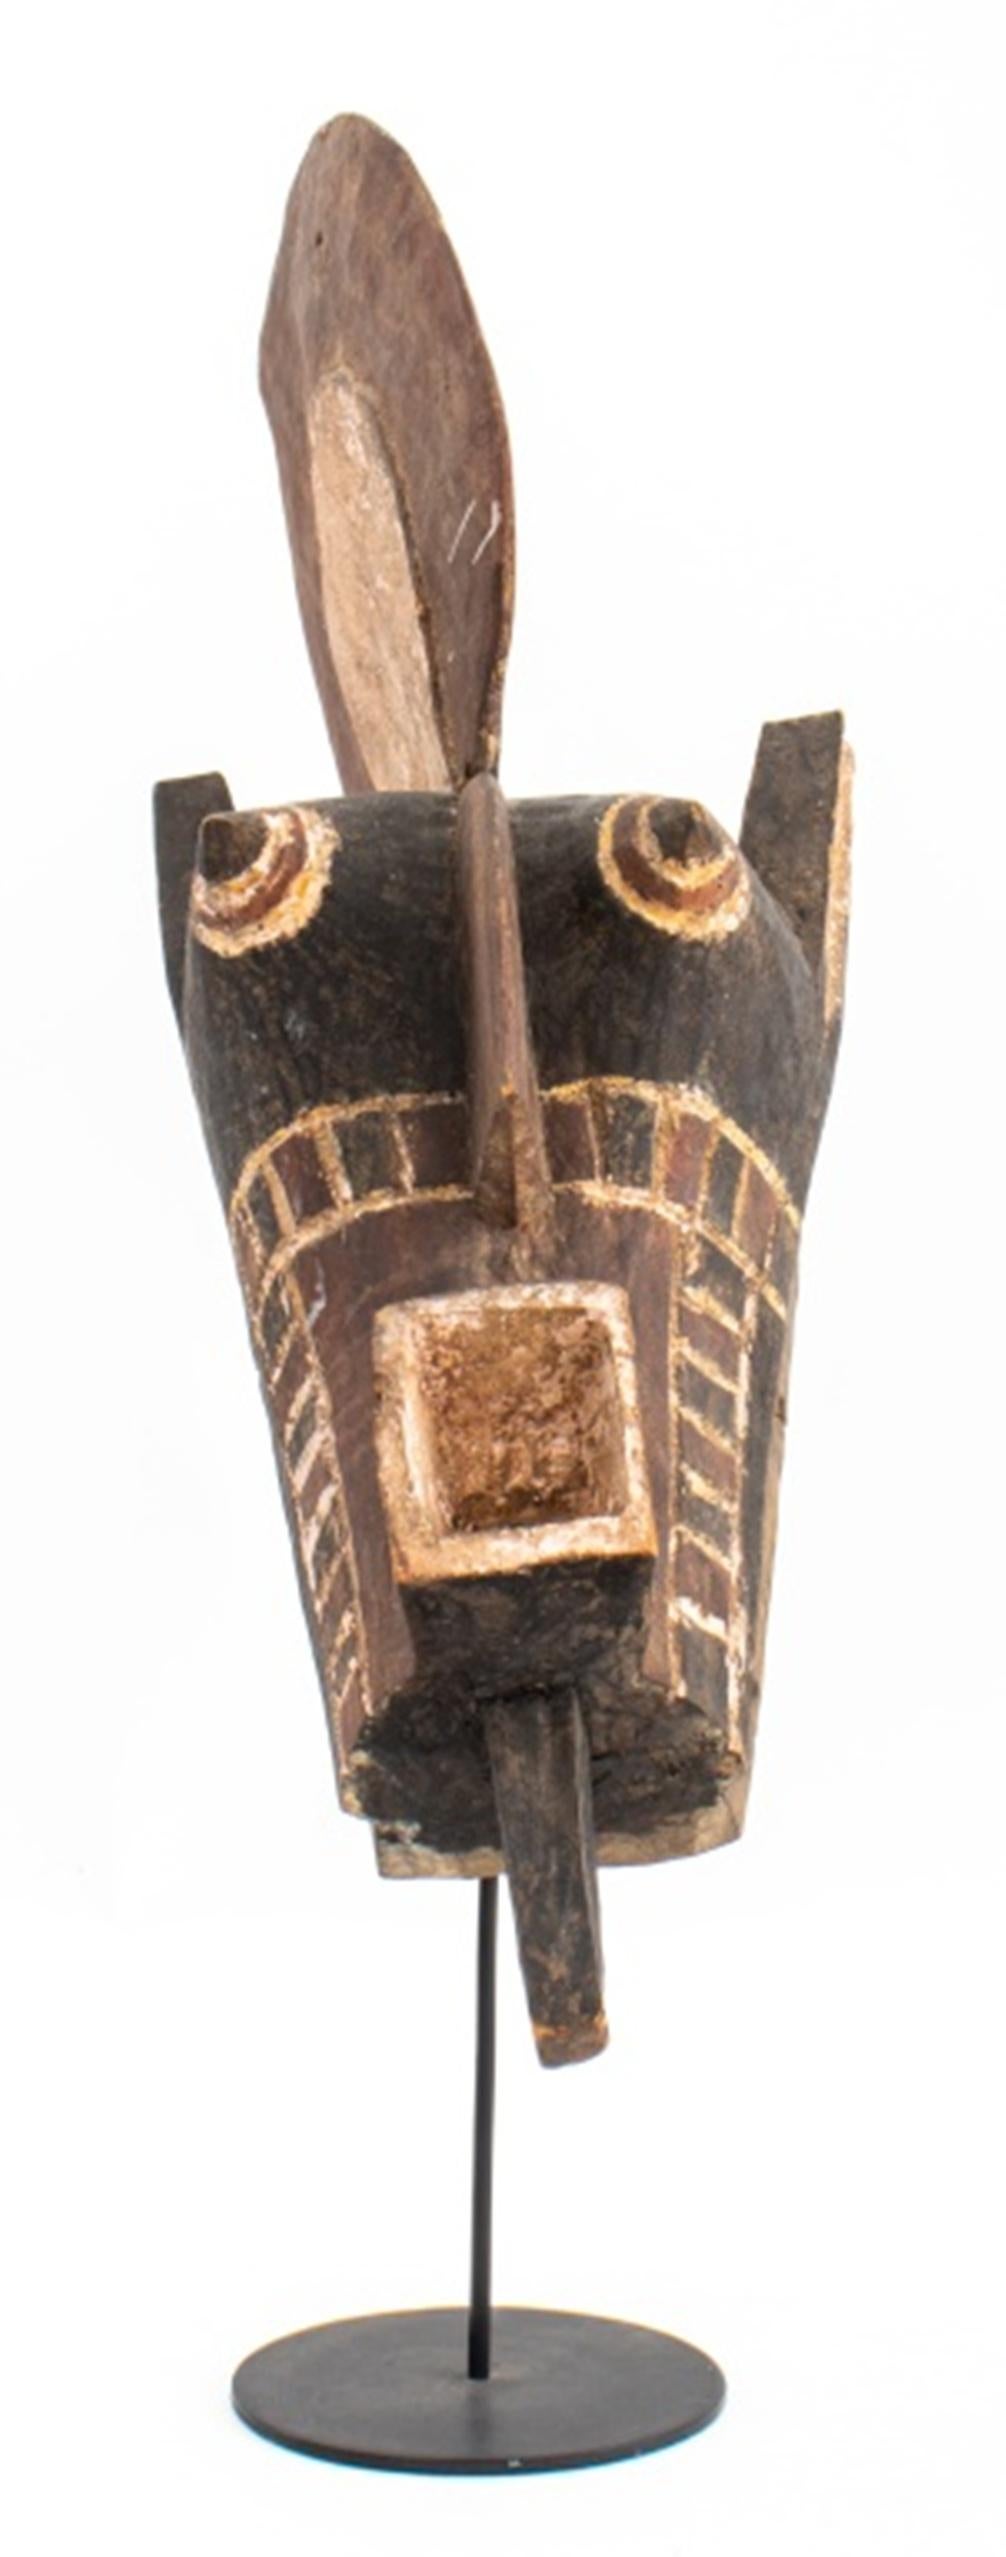 African Tribal mask, likely Sognye peoples of the Democratic Republic of Congo, with square mouth and protruding eyes, and fan comb to crown, with custom stand.

Dimensions: 27